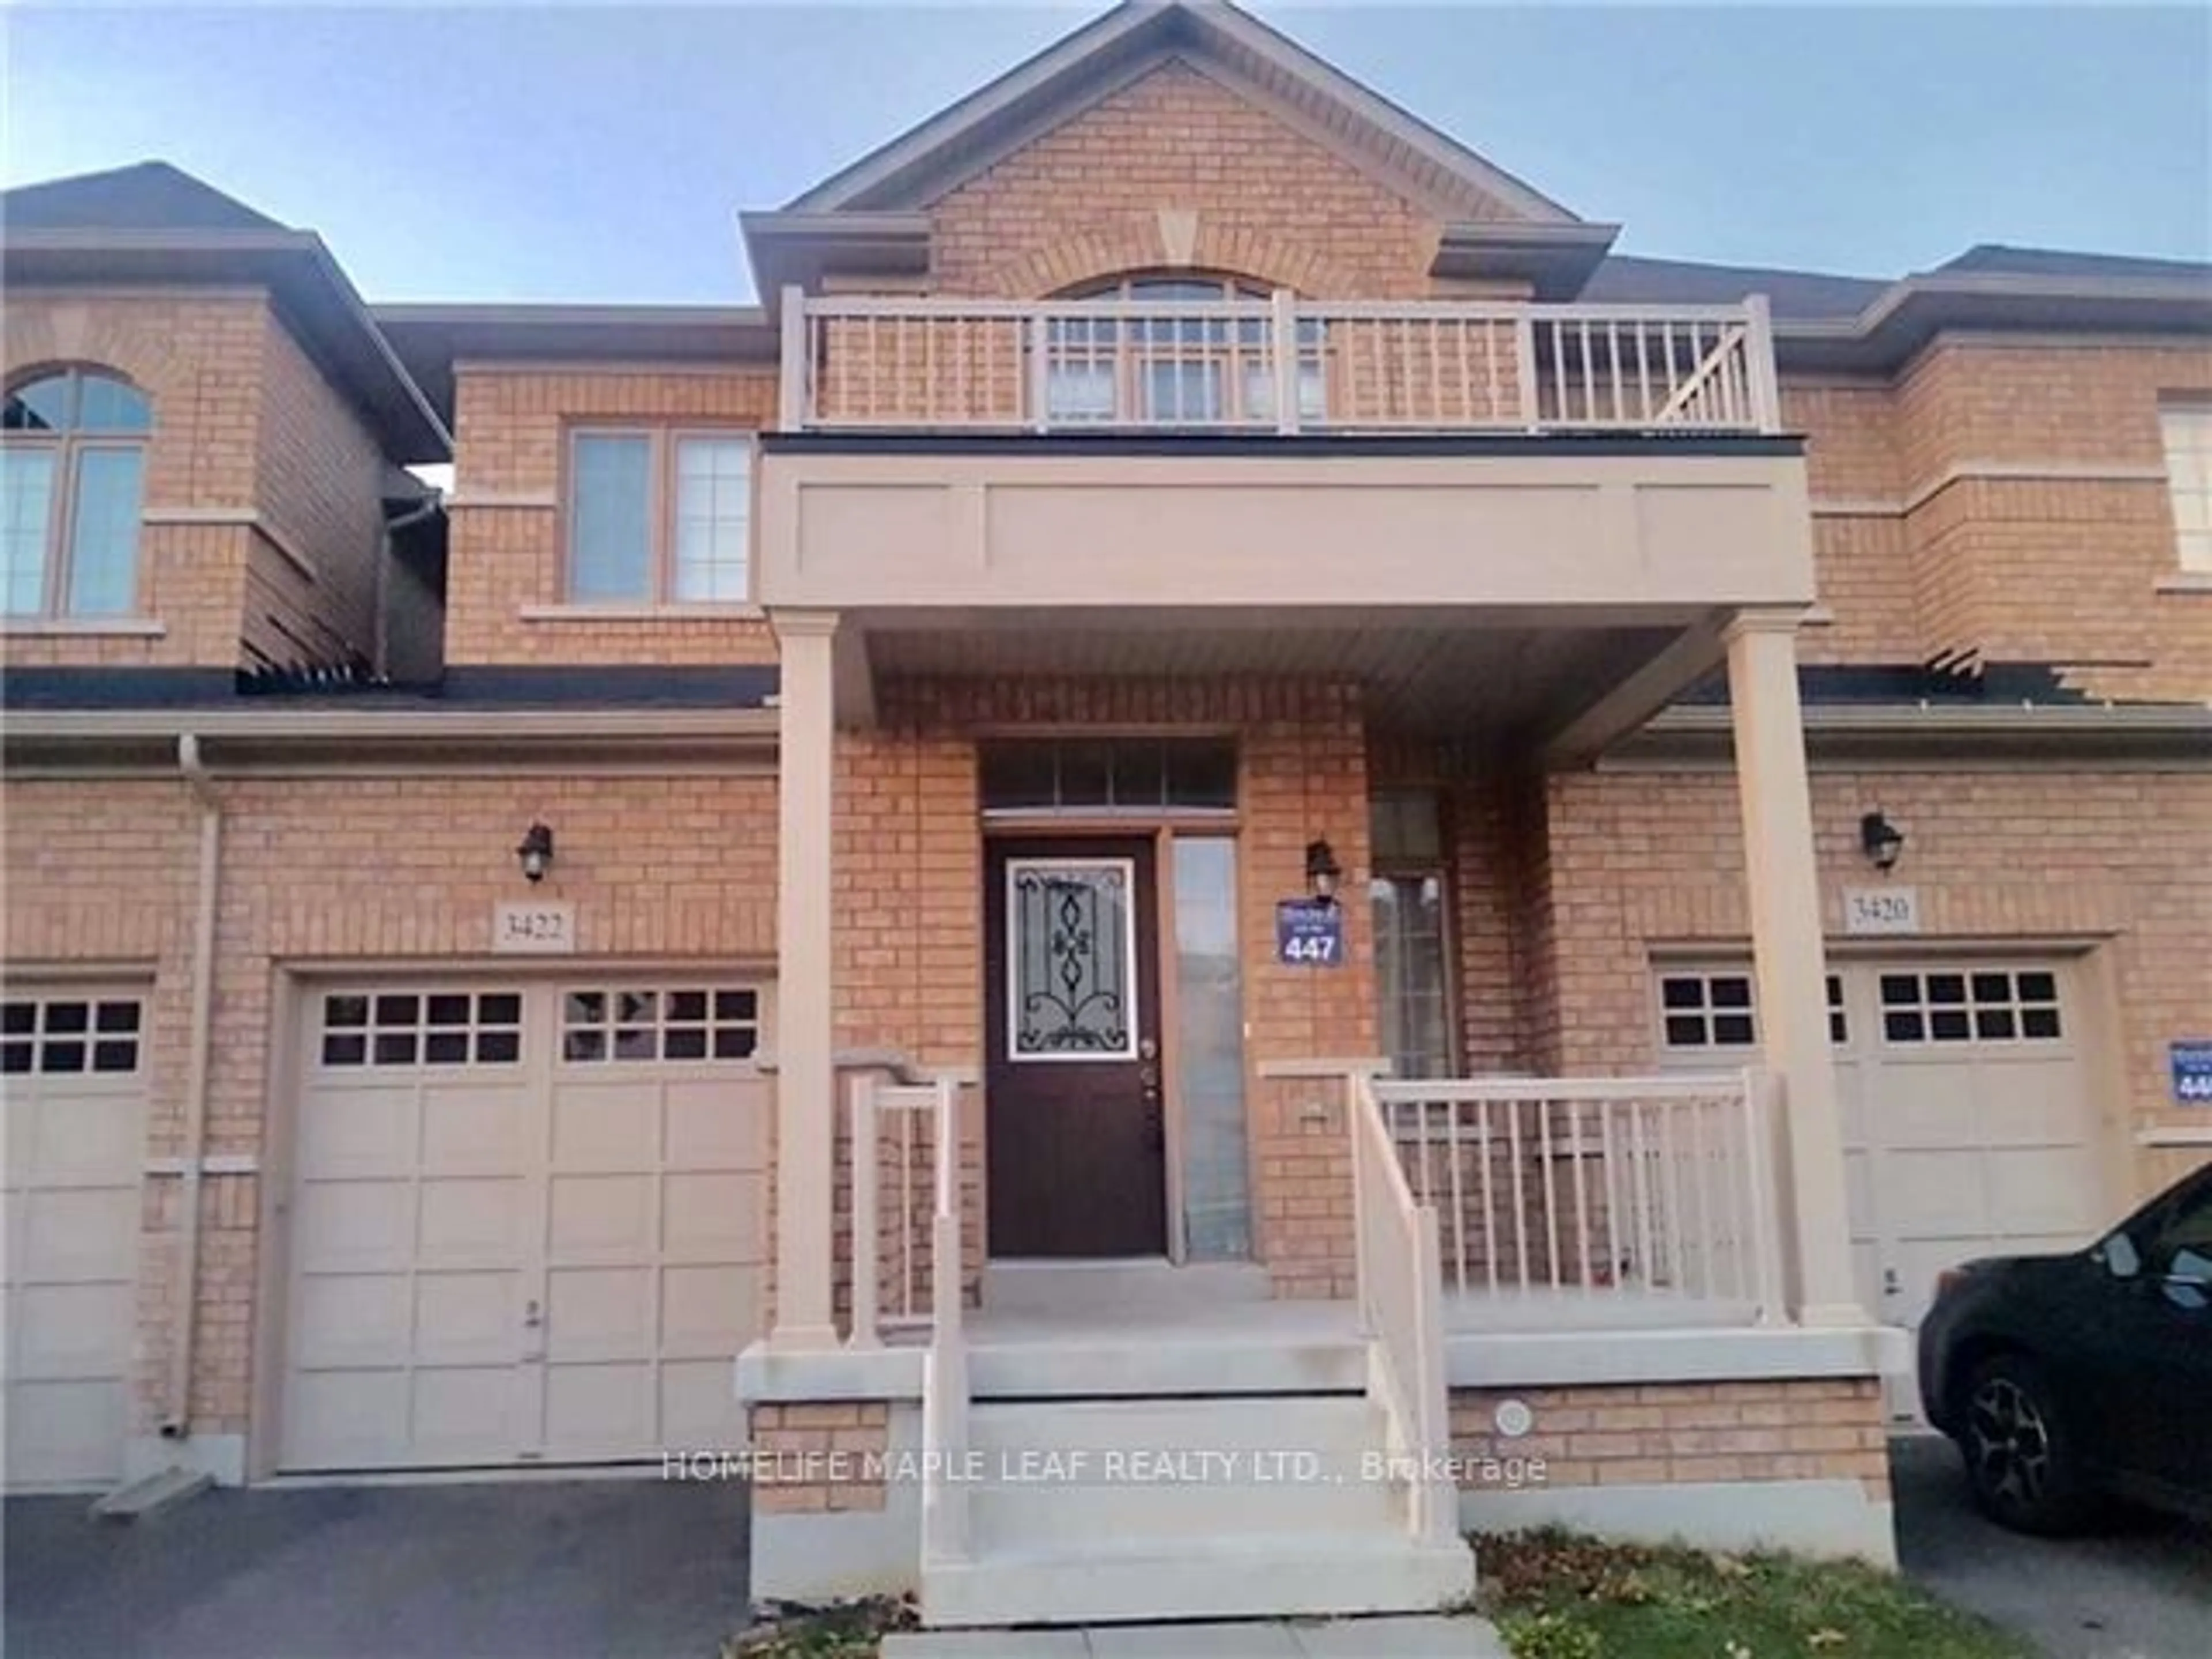 Home with brick exterior material for 3422 Stoney Cres, Mississauga Ontario L5M 0V5